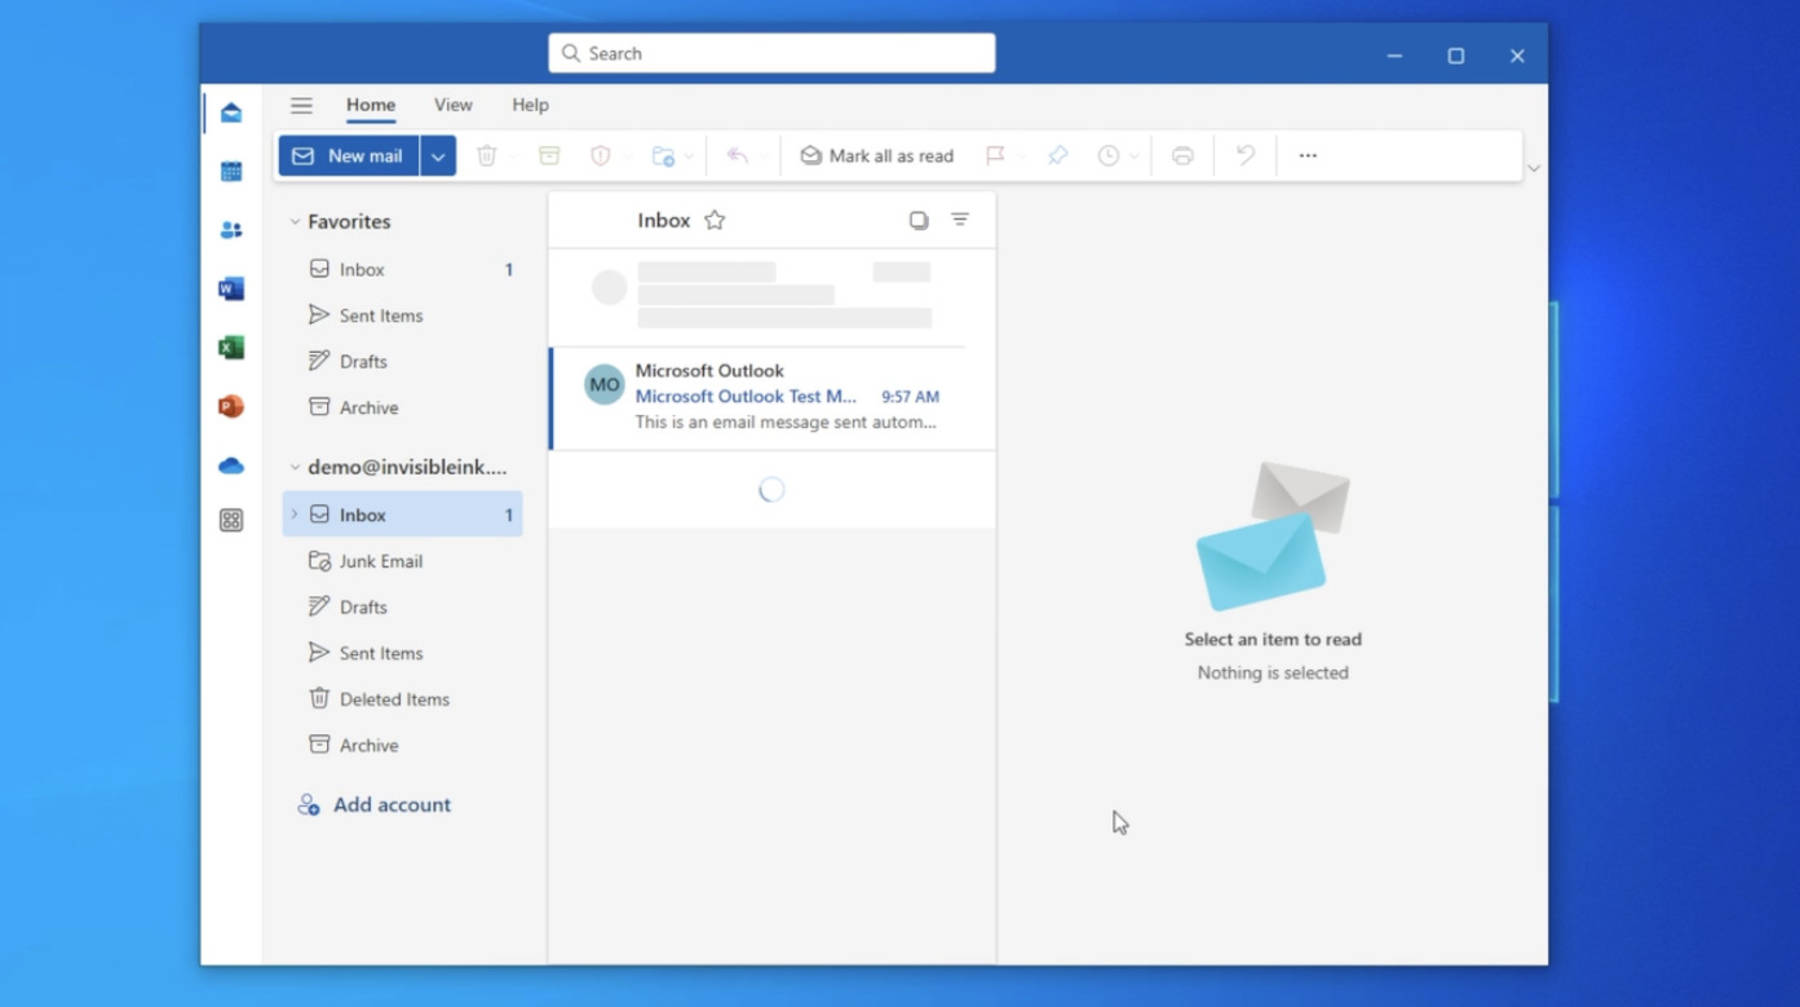 Step 9: Microsoft will finalize the setup of your new mailbox and you should be automatically redirected to the inbox to start using your account.